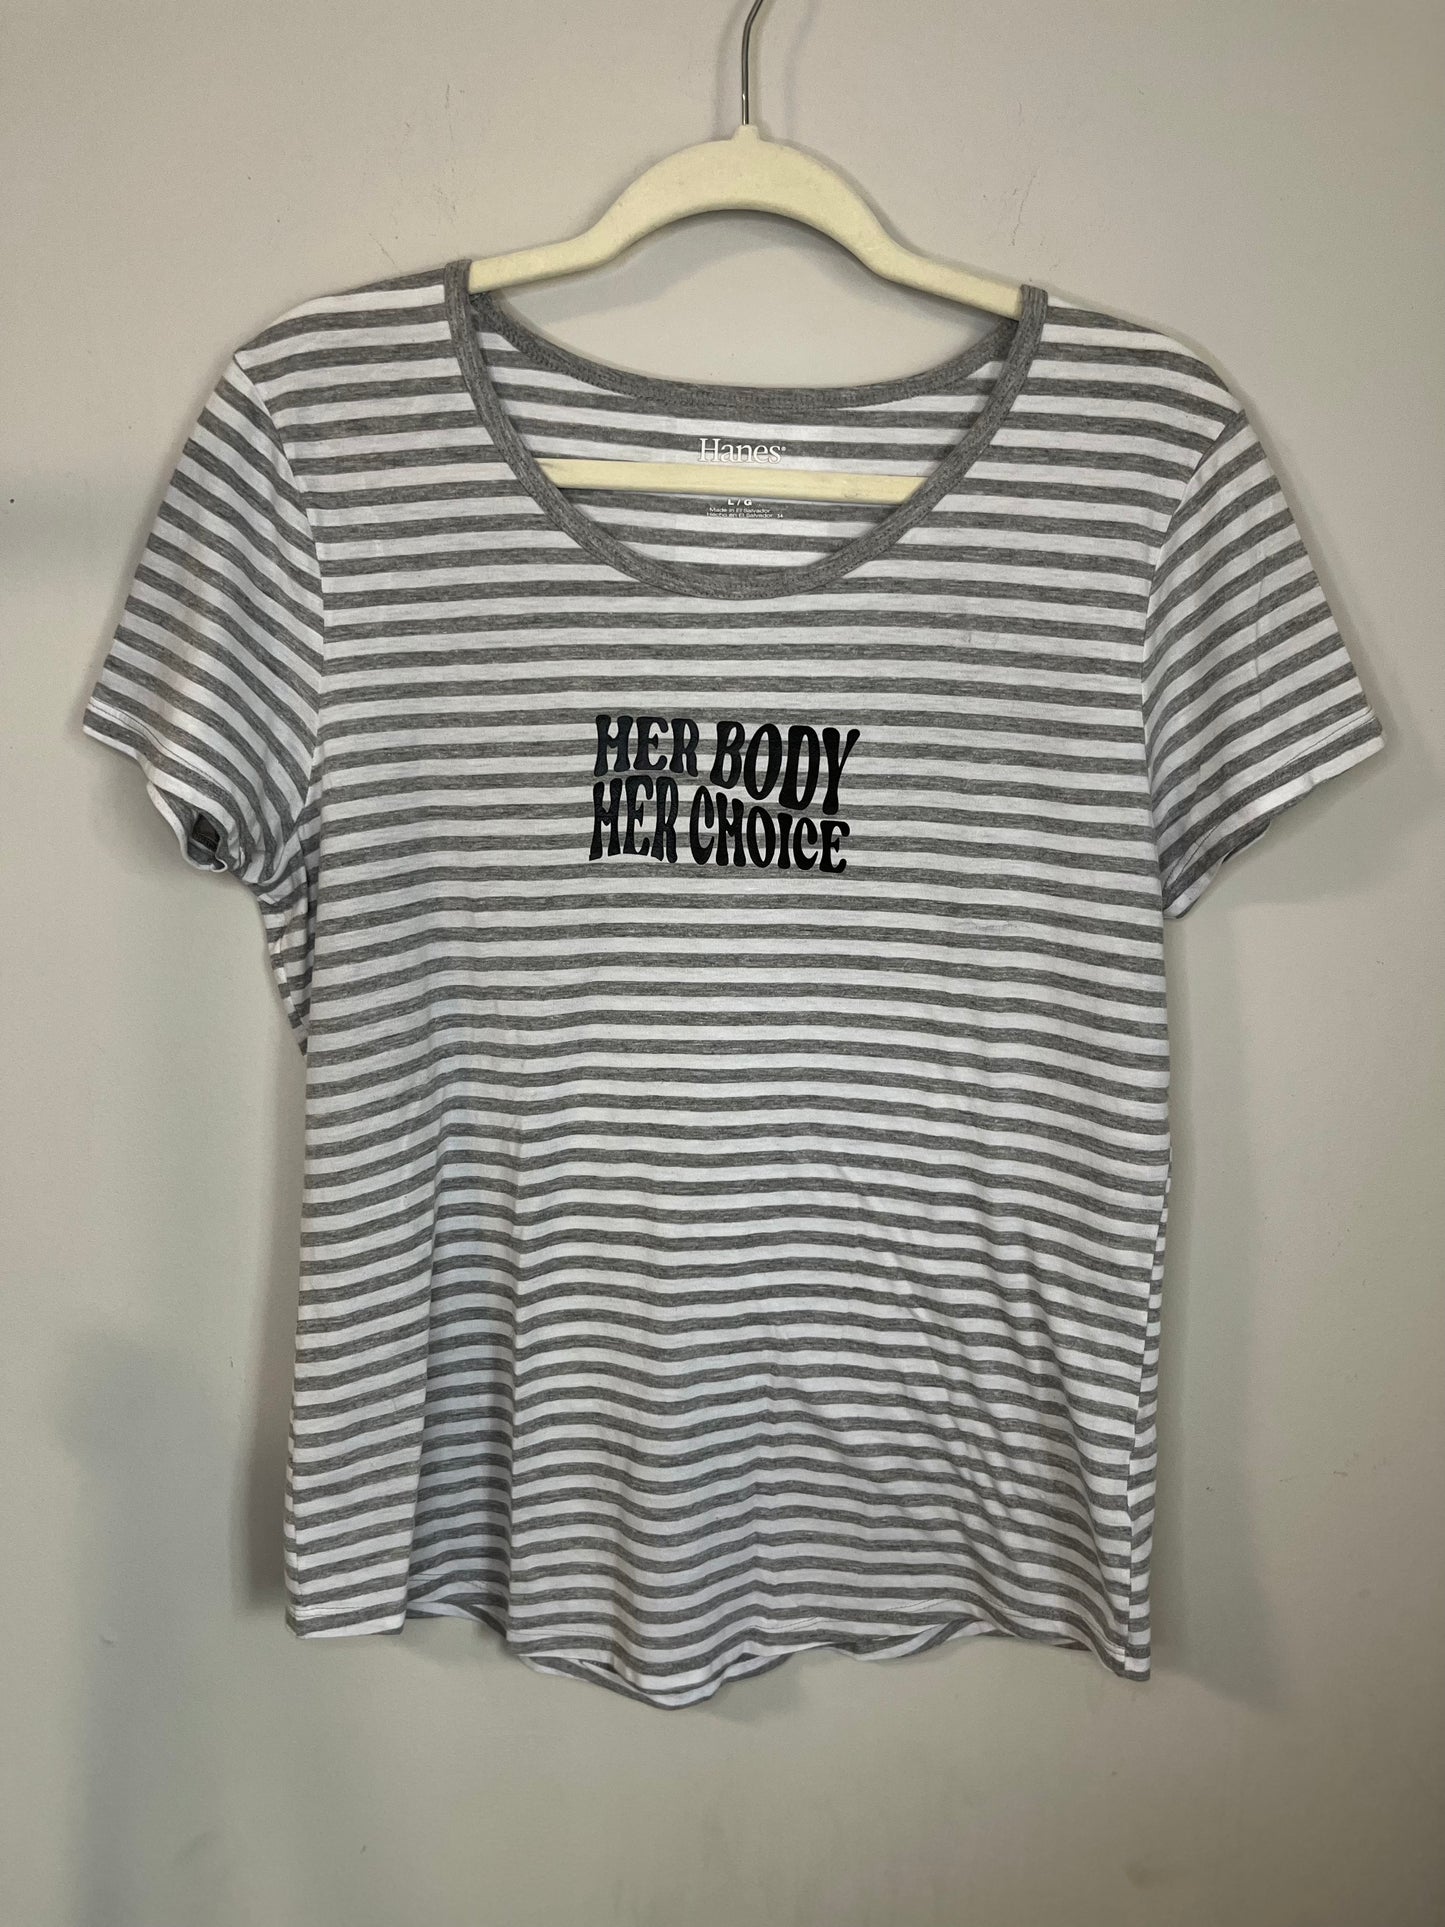 Striped Her Body Her Choice Tee | Women's L